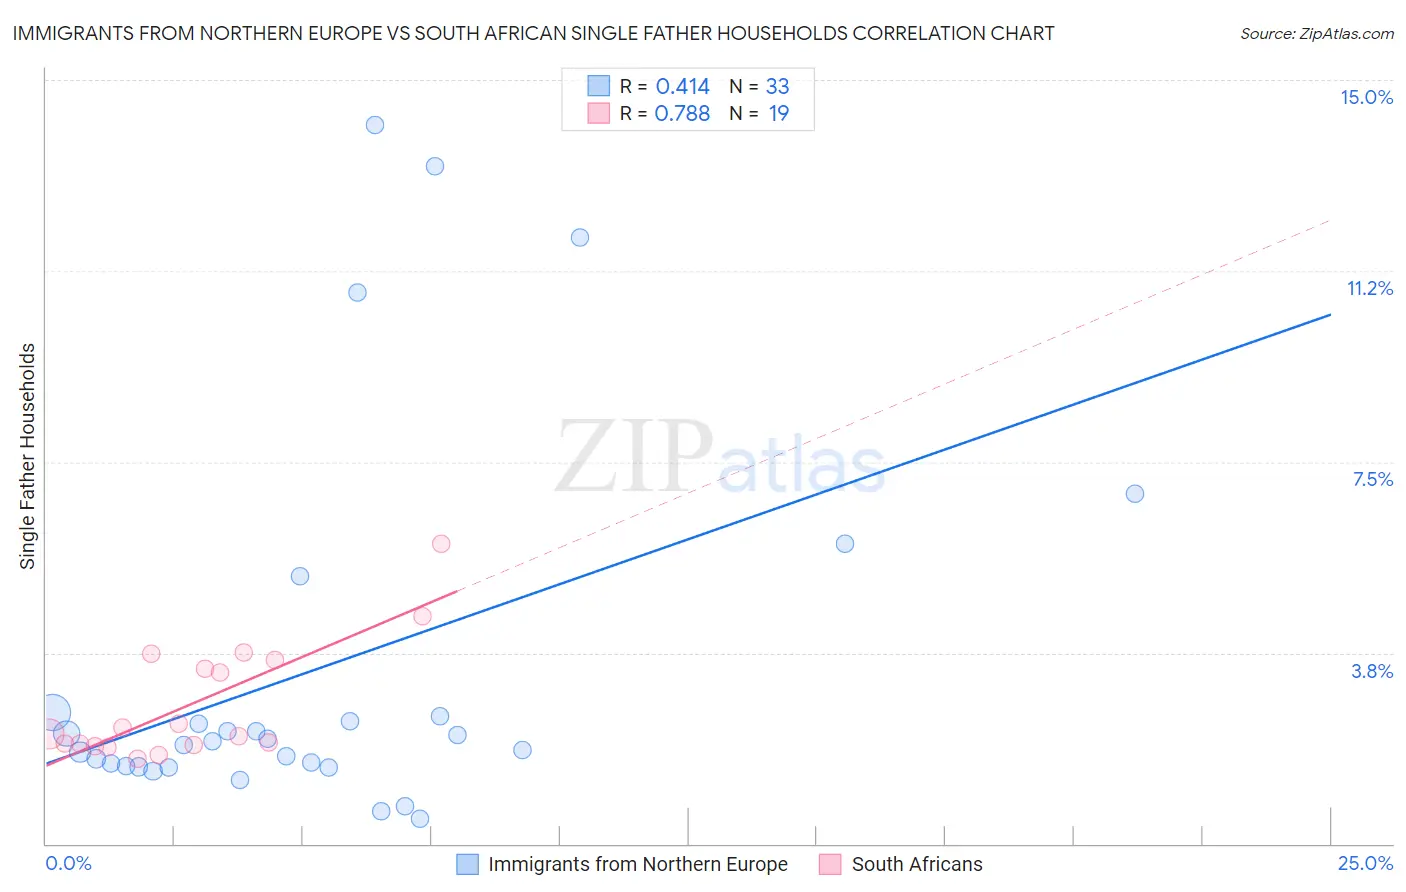 Immigrants from Northern Europe vs South African Single Father Households